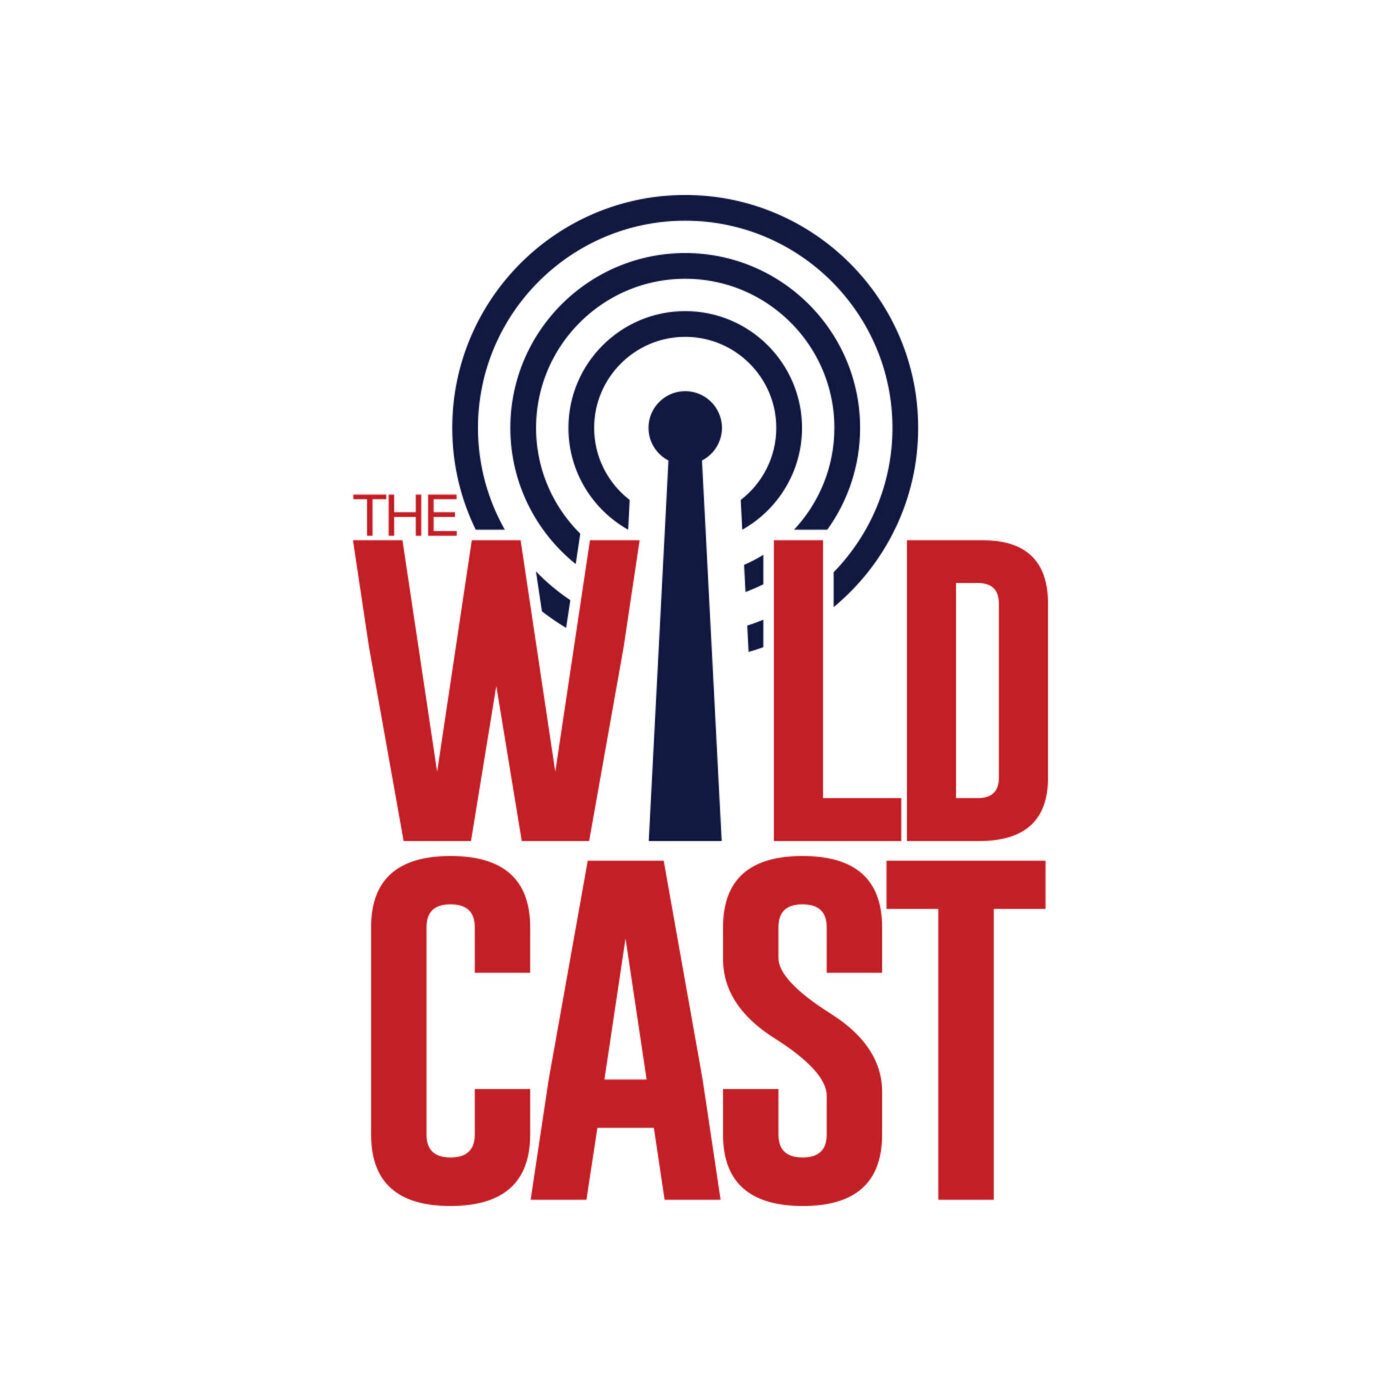 The Wildcast, Episode 411: Arizona gets served slice of humble pie after loss to Wazzu; UA women’s team sweeps Oregon schools